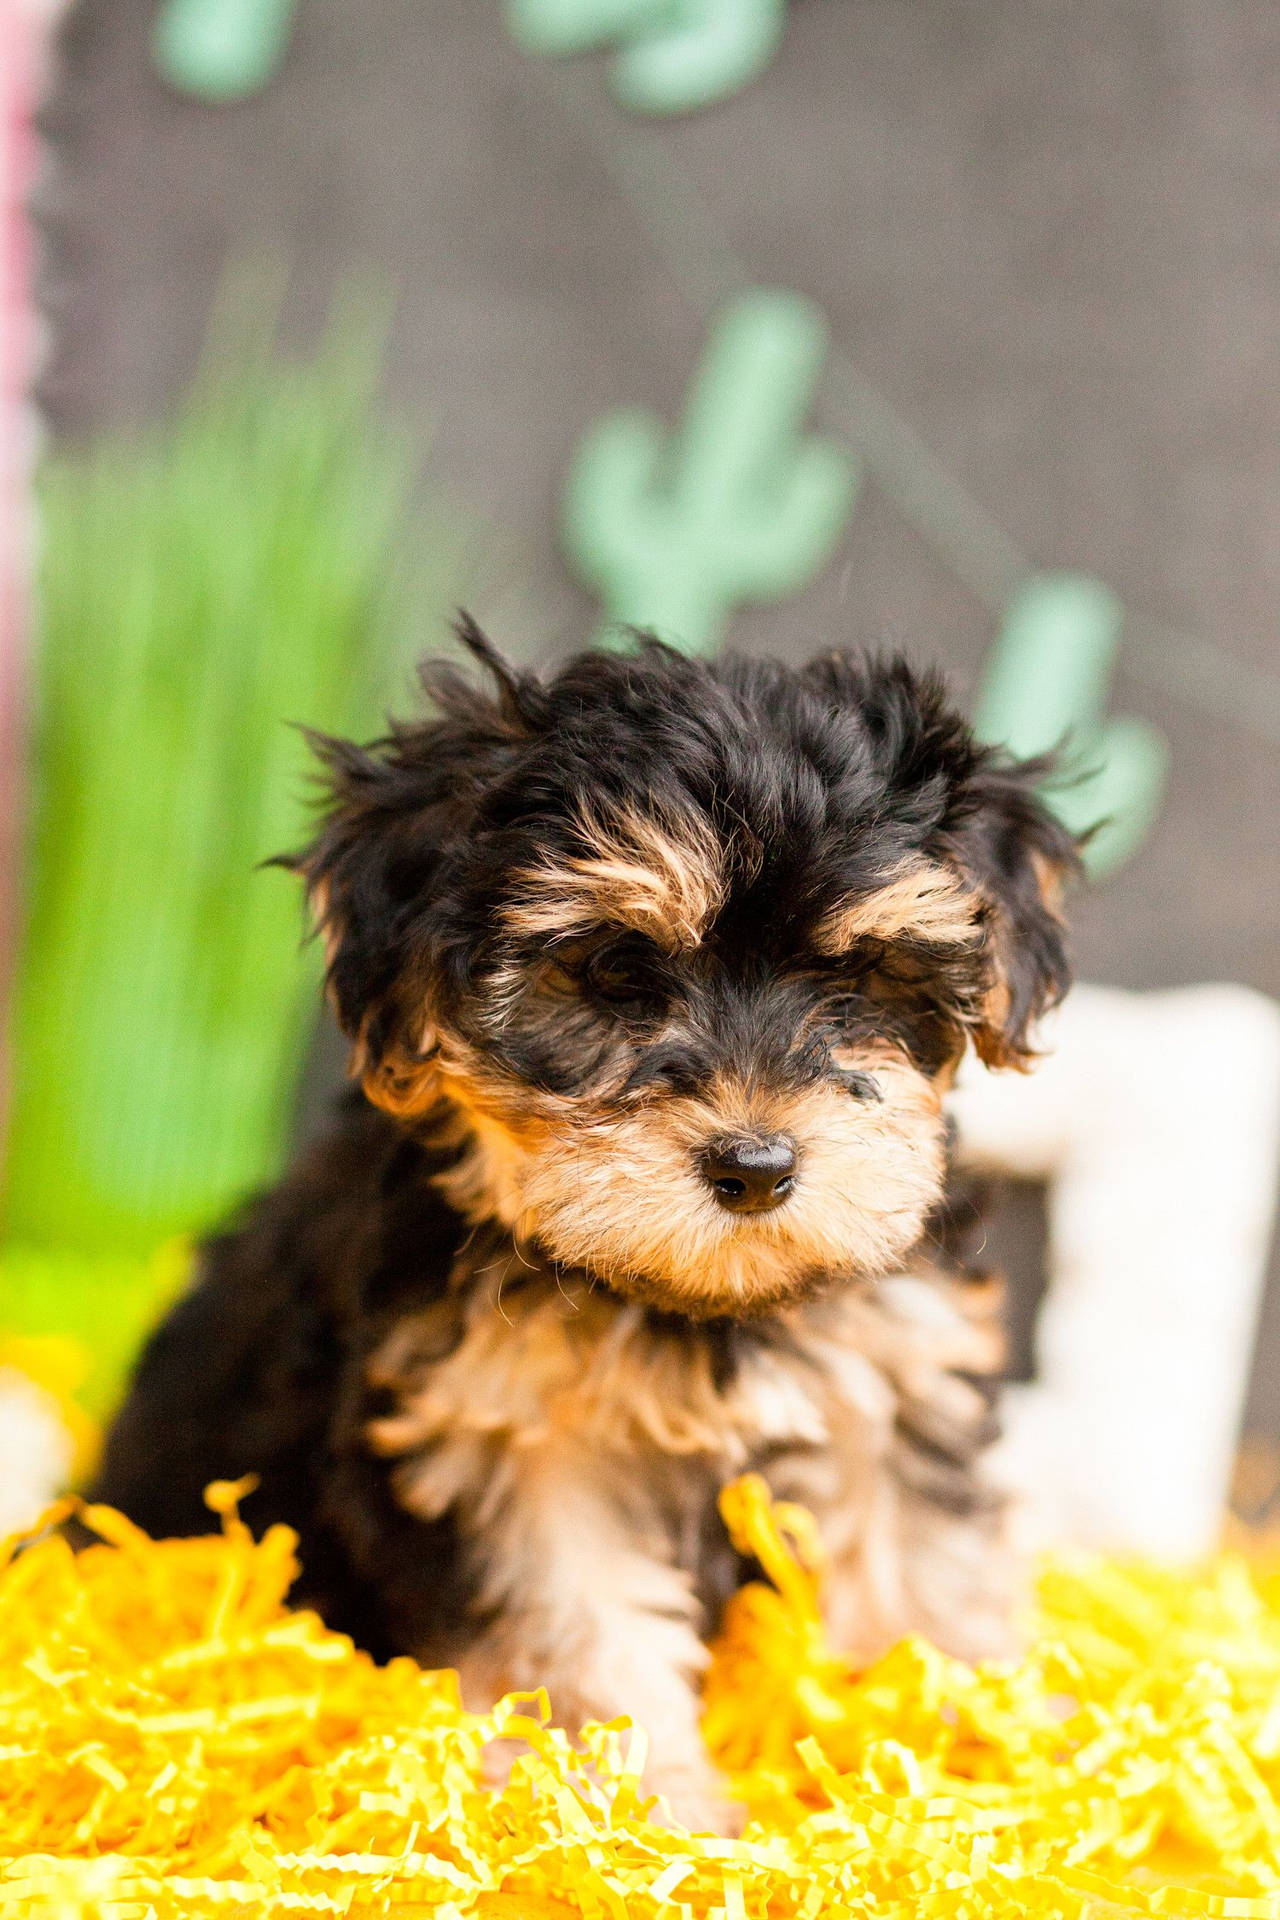 Furry Yorkshire Terrier Puppy Photography Wallpaper